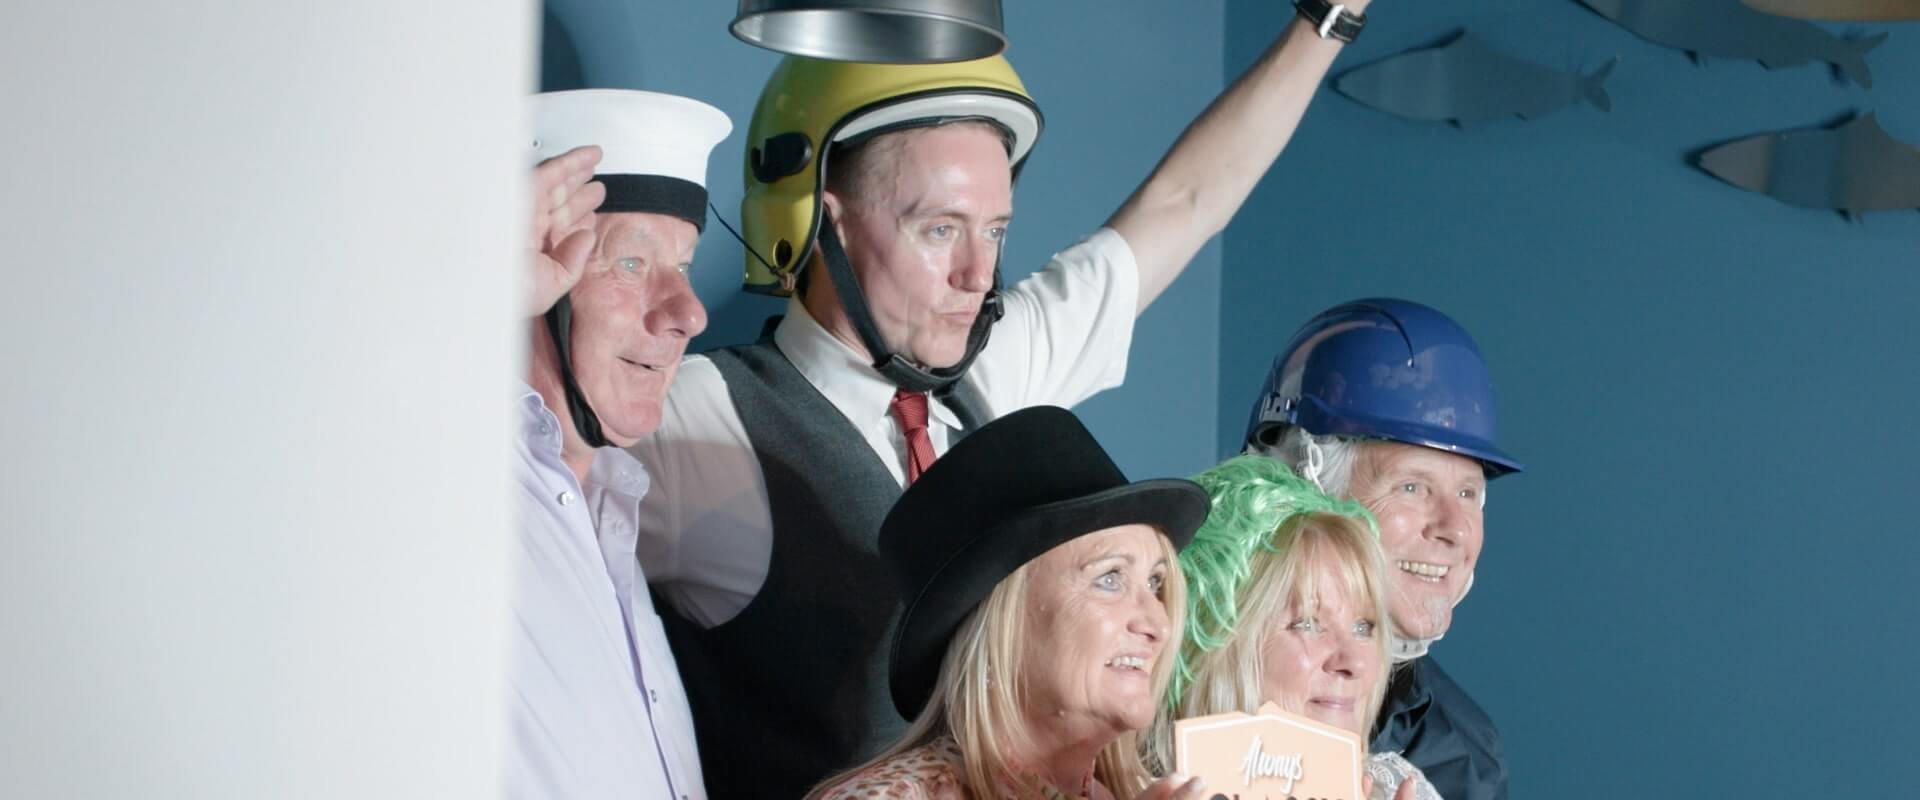 drunk wedding guests get dressed up in novelty outfits for photo booth